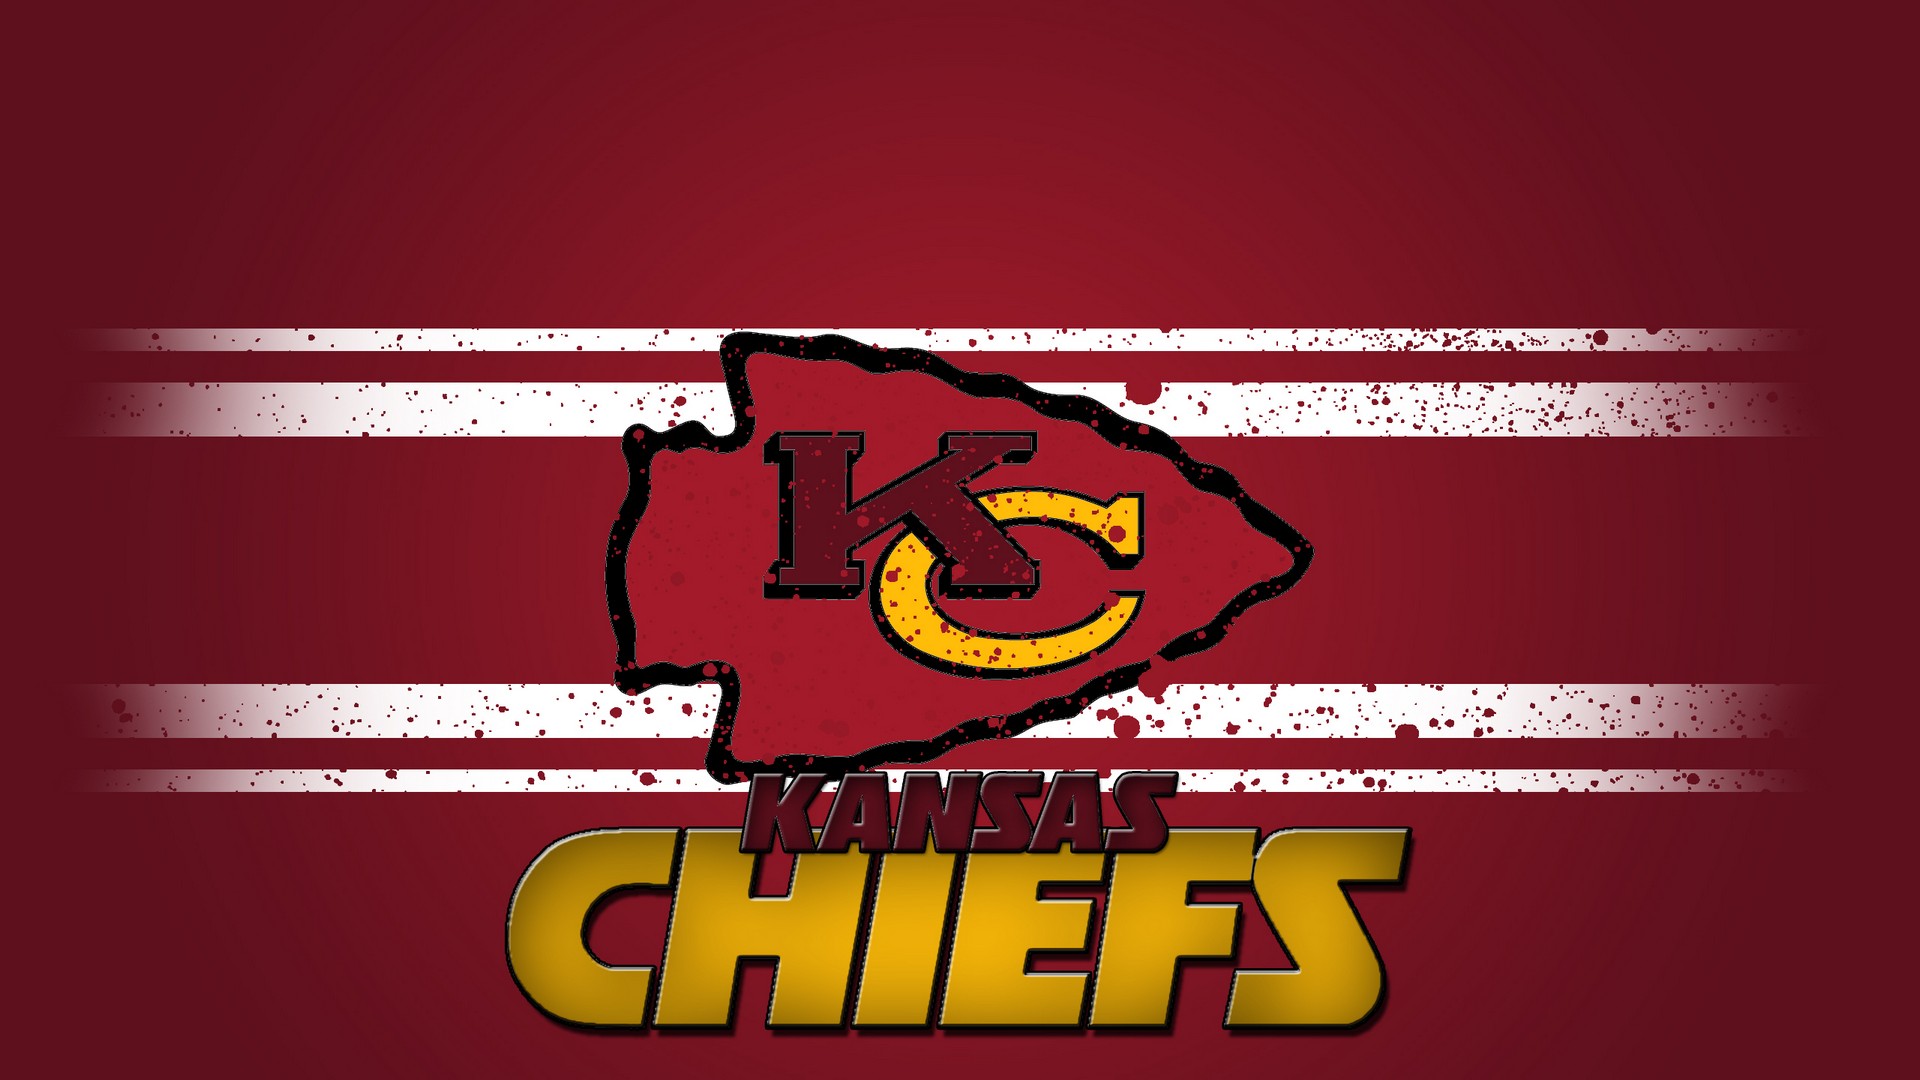 HD Desktop Wallpaper Kansas City Chiefs with resolution 1920x1080 pixel. You can make this wallpaper for your Mac or Windows Desktop Background, iPhone, Android or Tablet and another Smartphone device